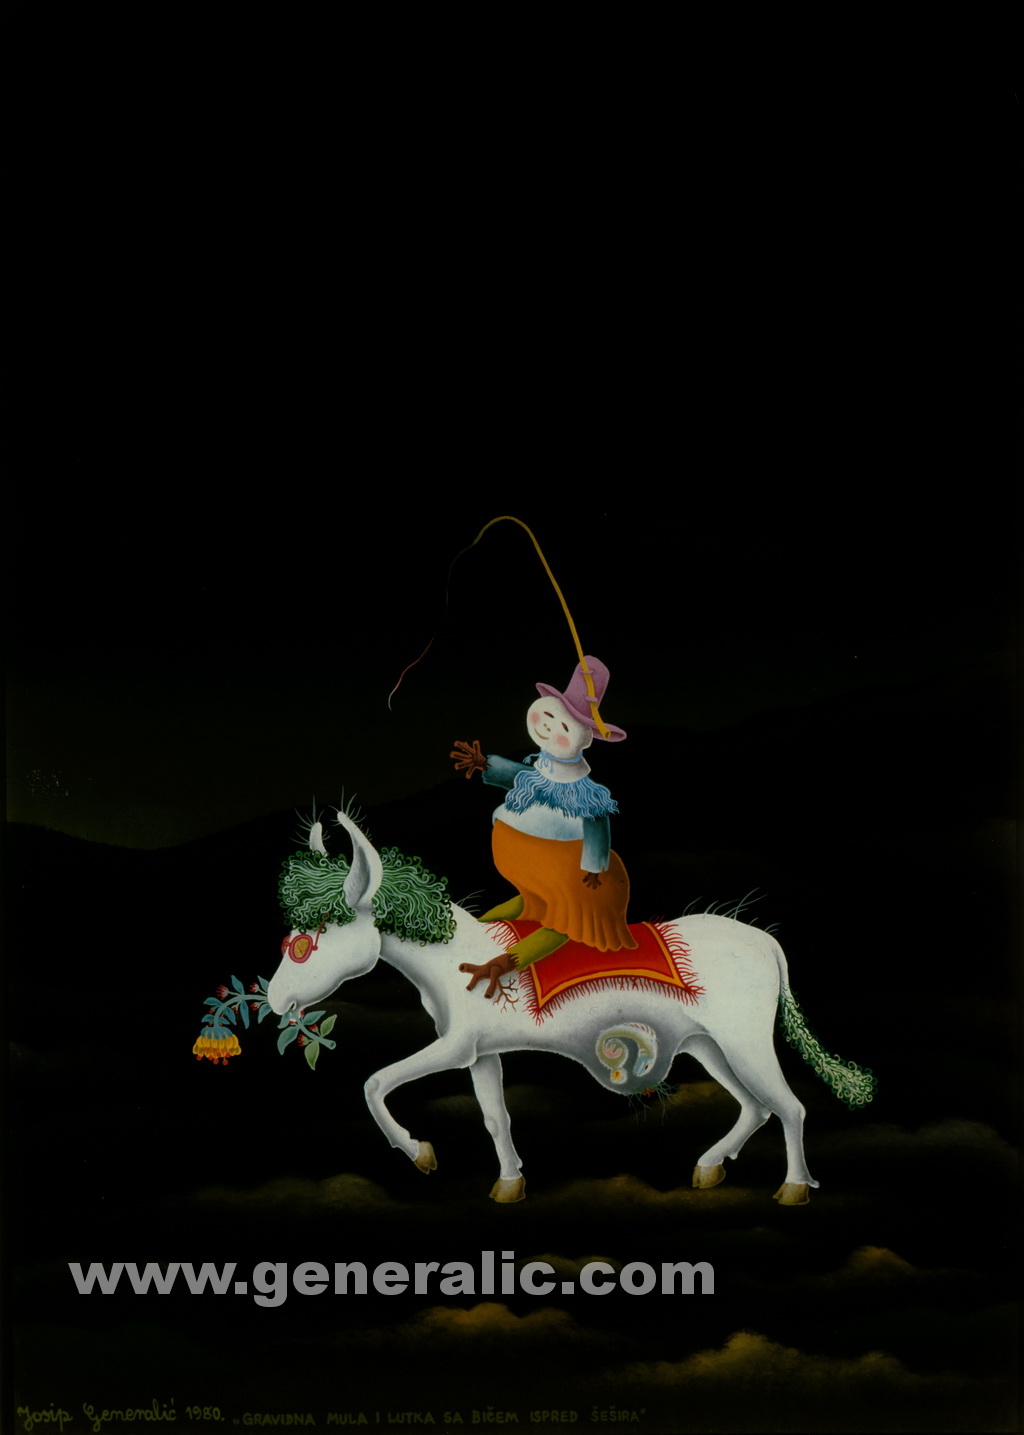 Josip Generalic, 1980, Pregnant mule and a doll, oil on glass, 70x50 cm